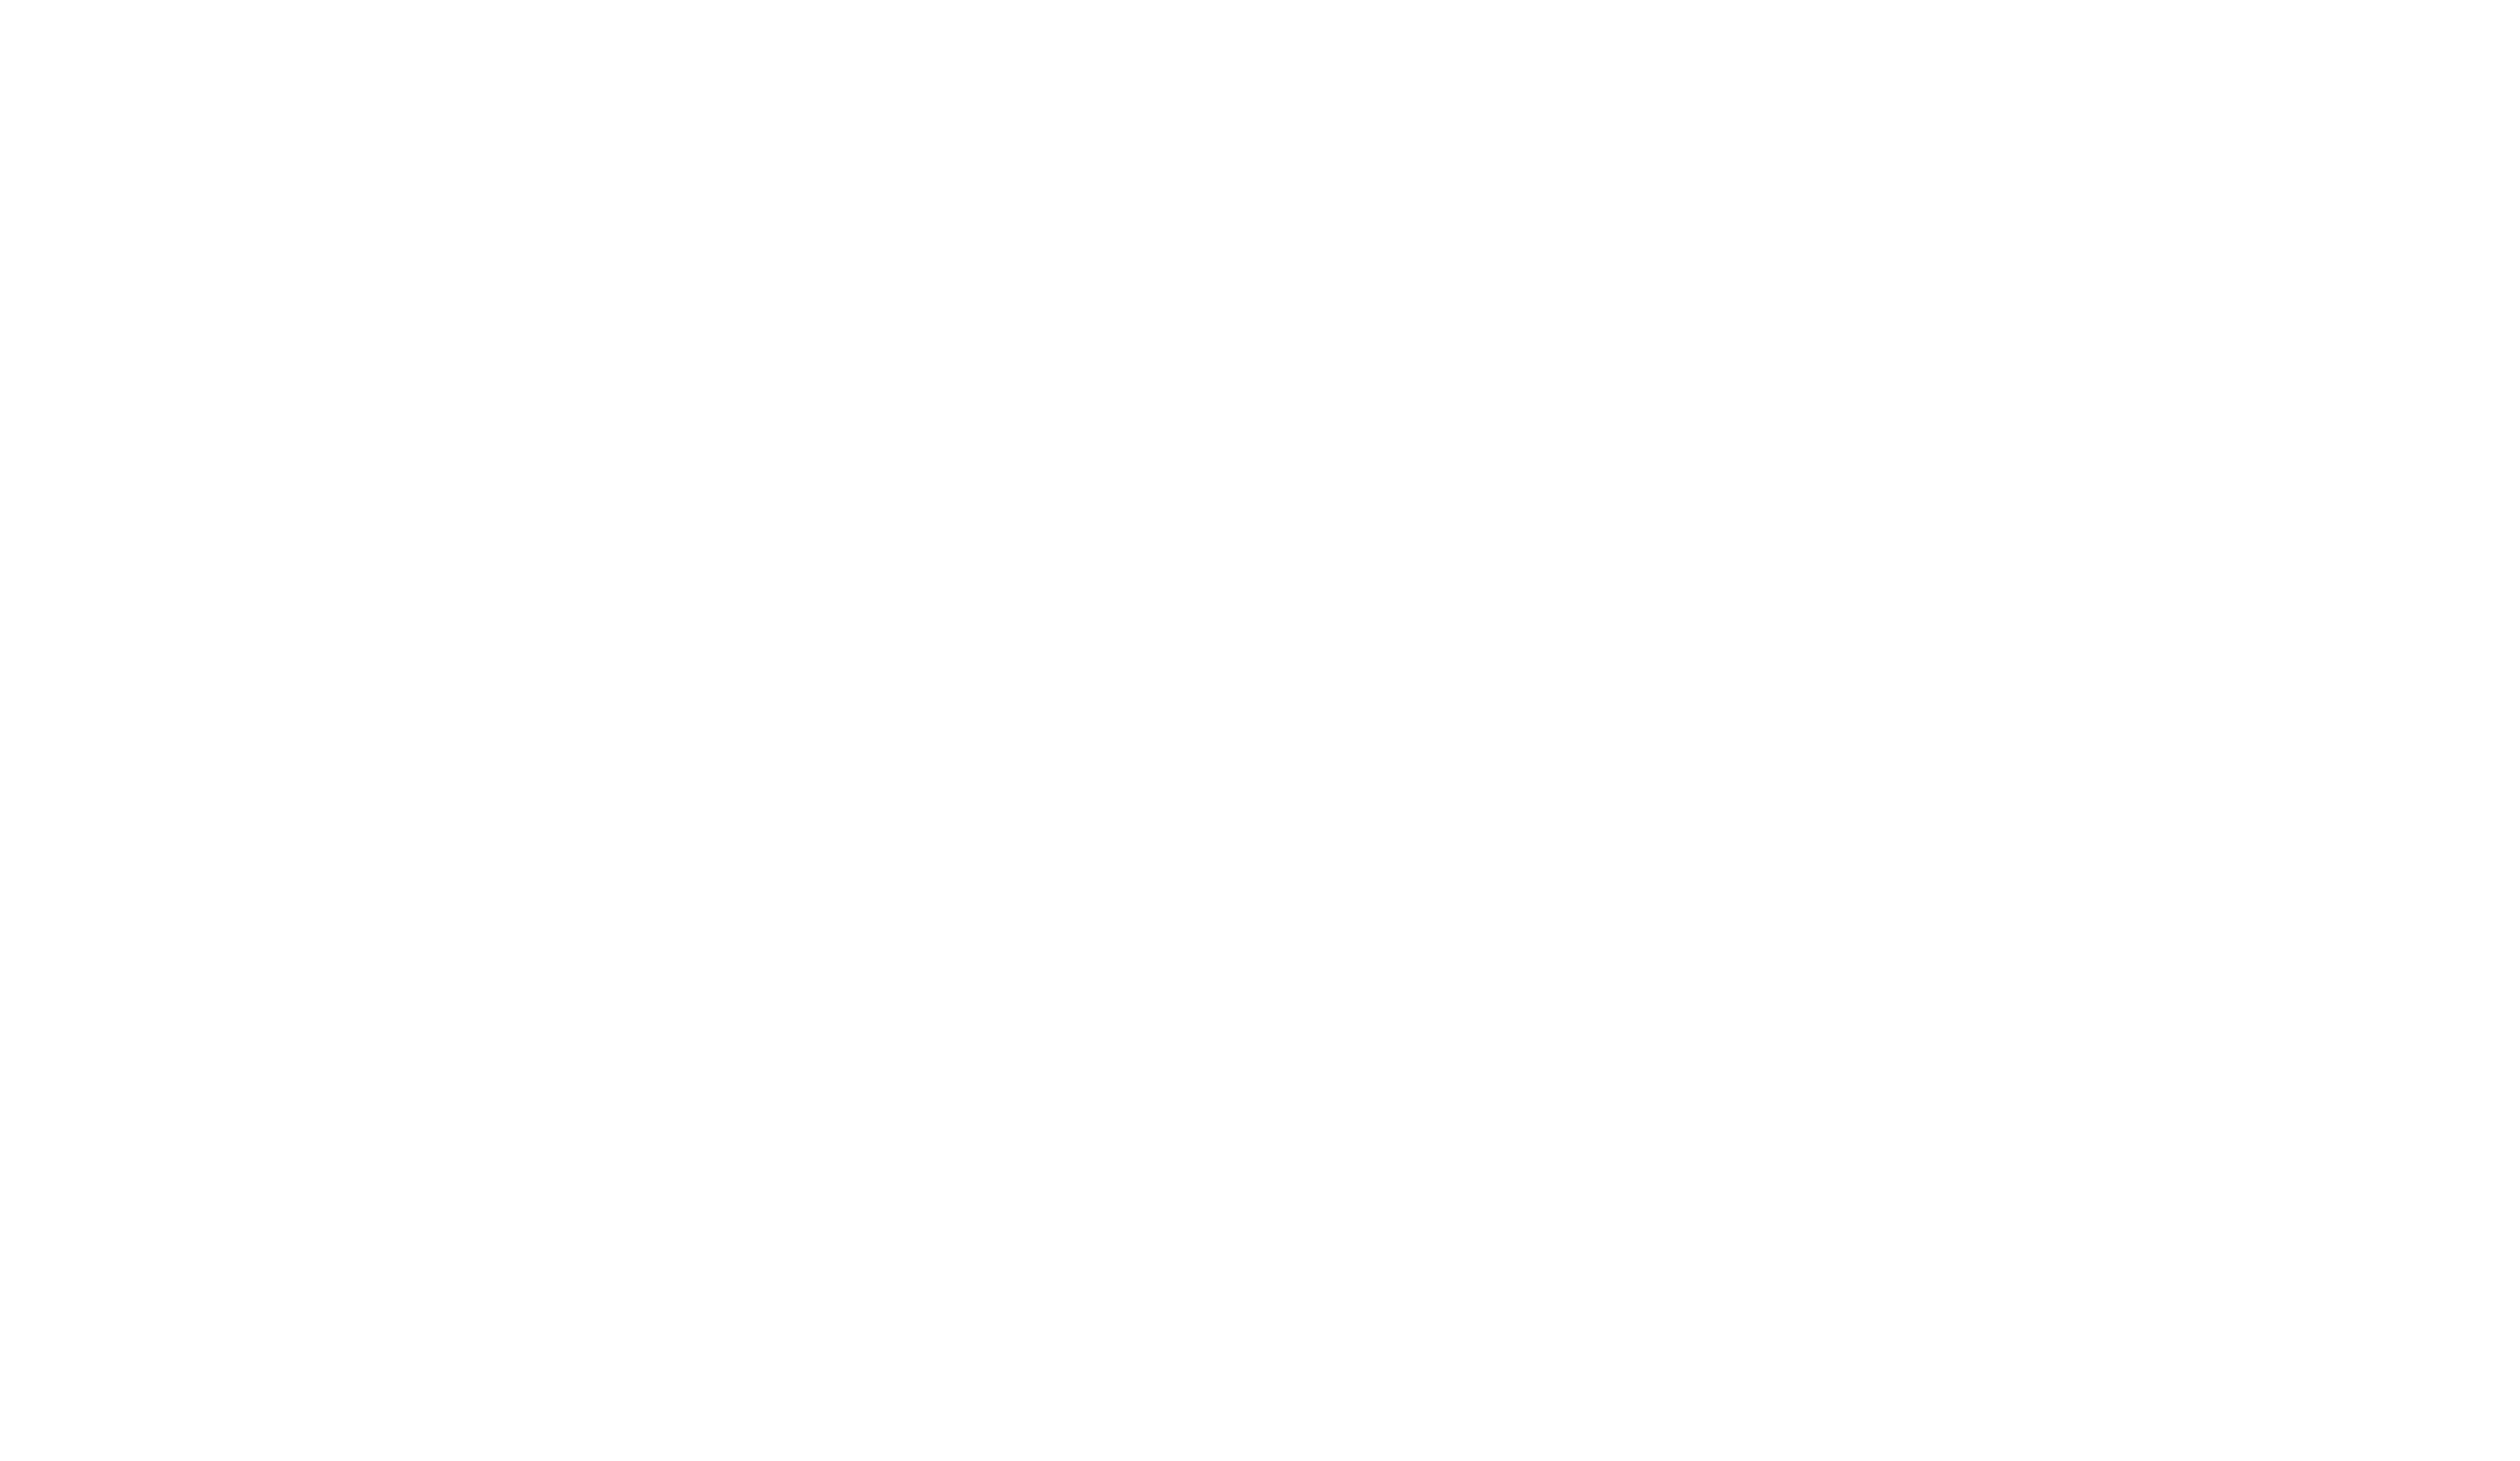 Sarah Clark for New York State Assembly